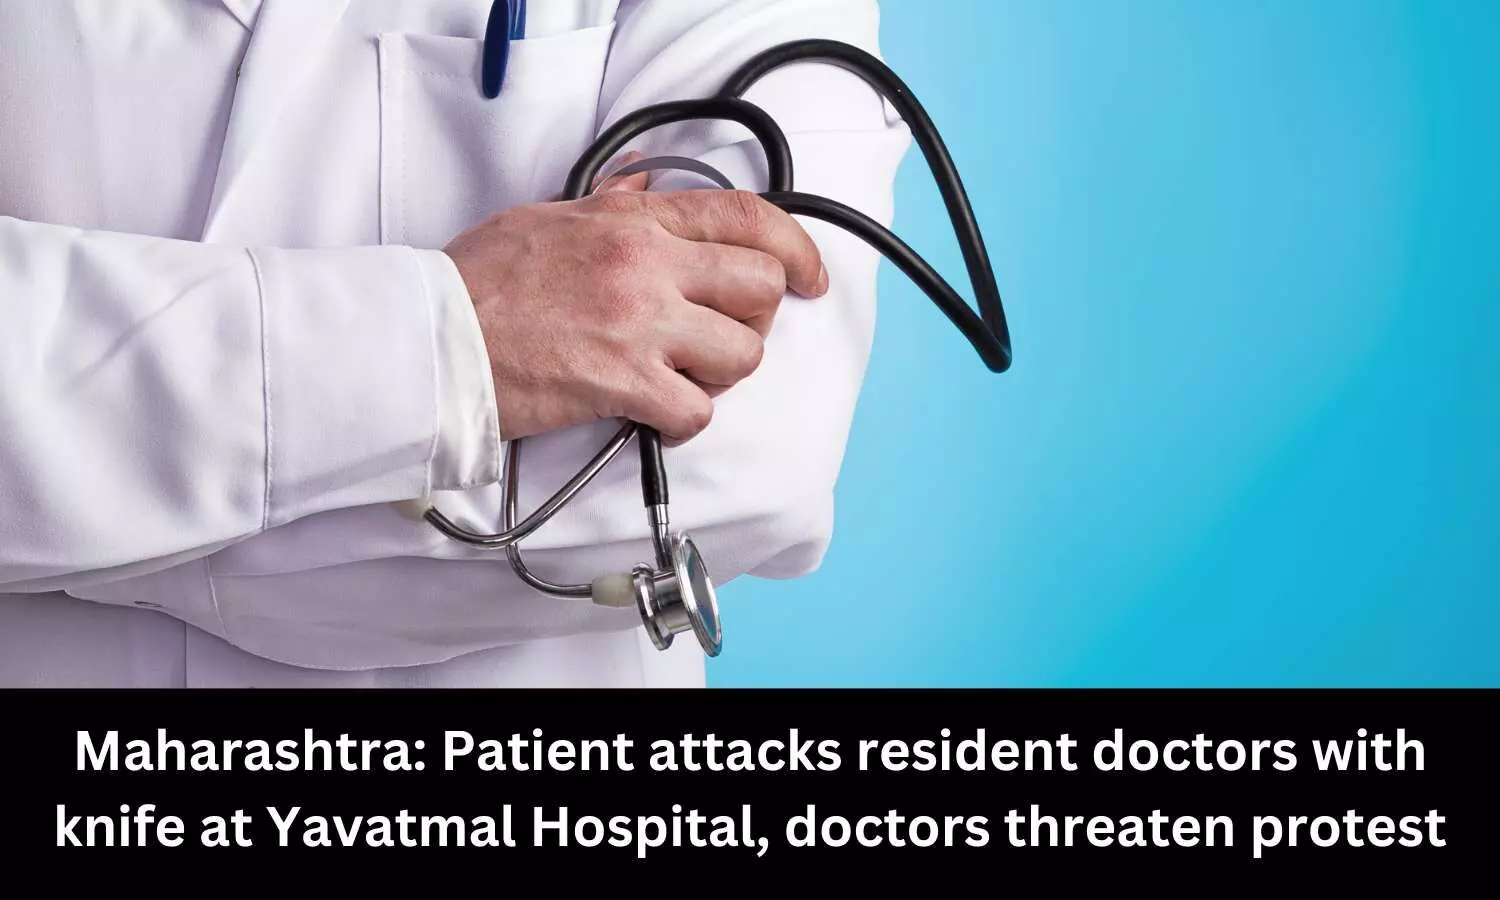 Patient attacks 2 resident doctors with knife at Govt hospital in Maharashtra